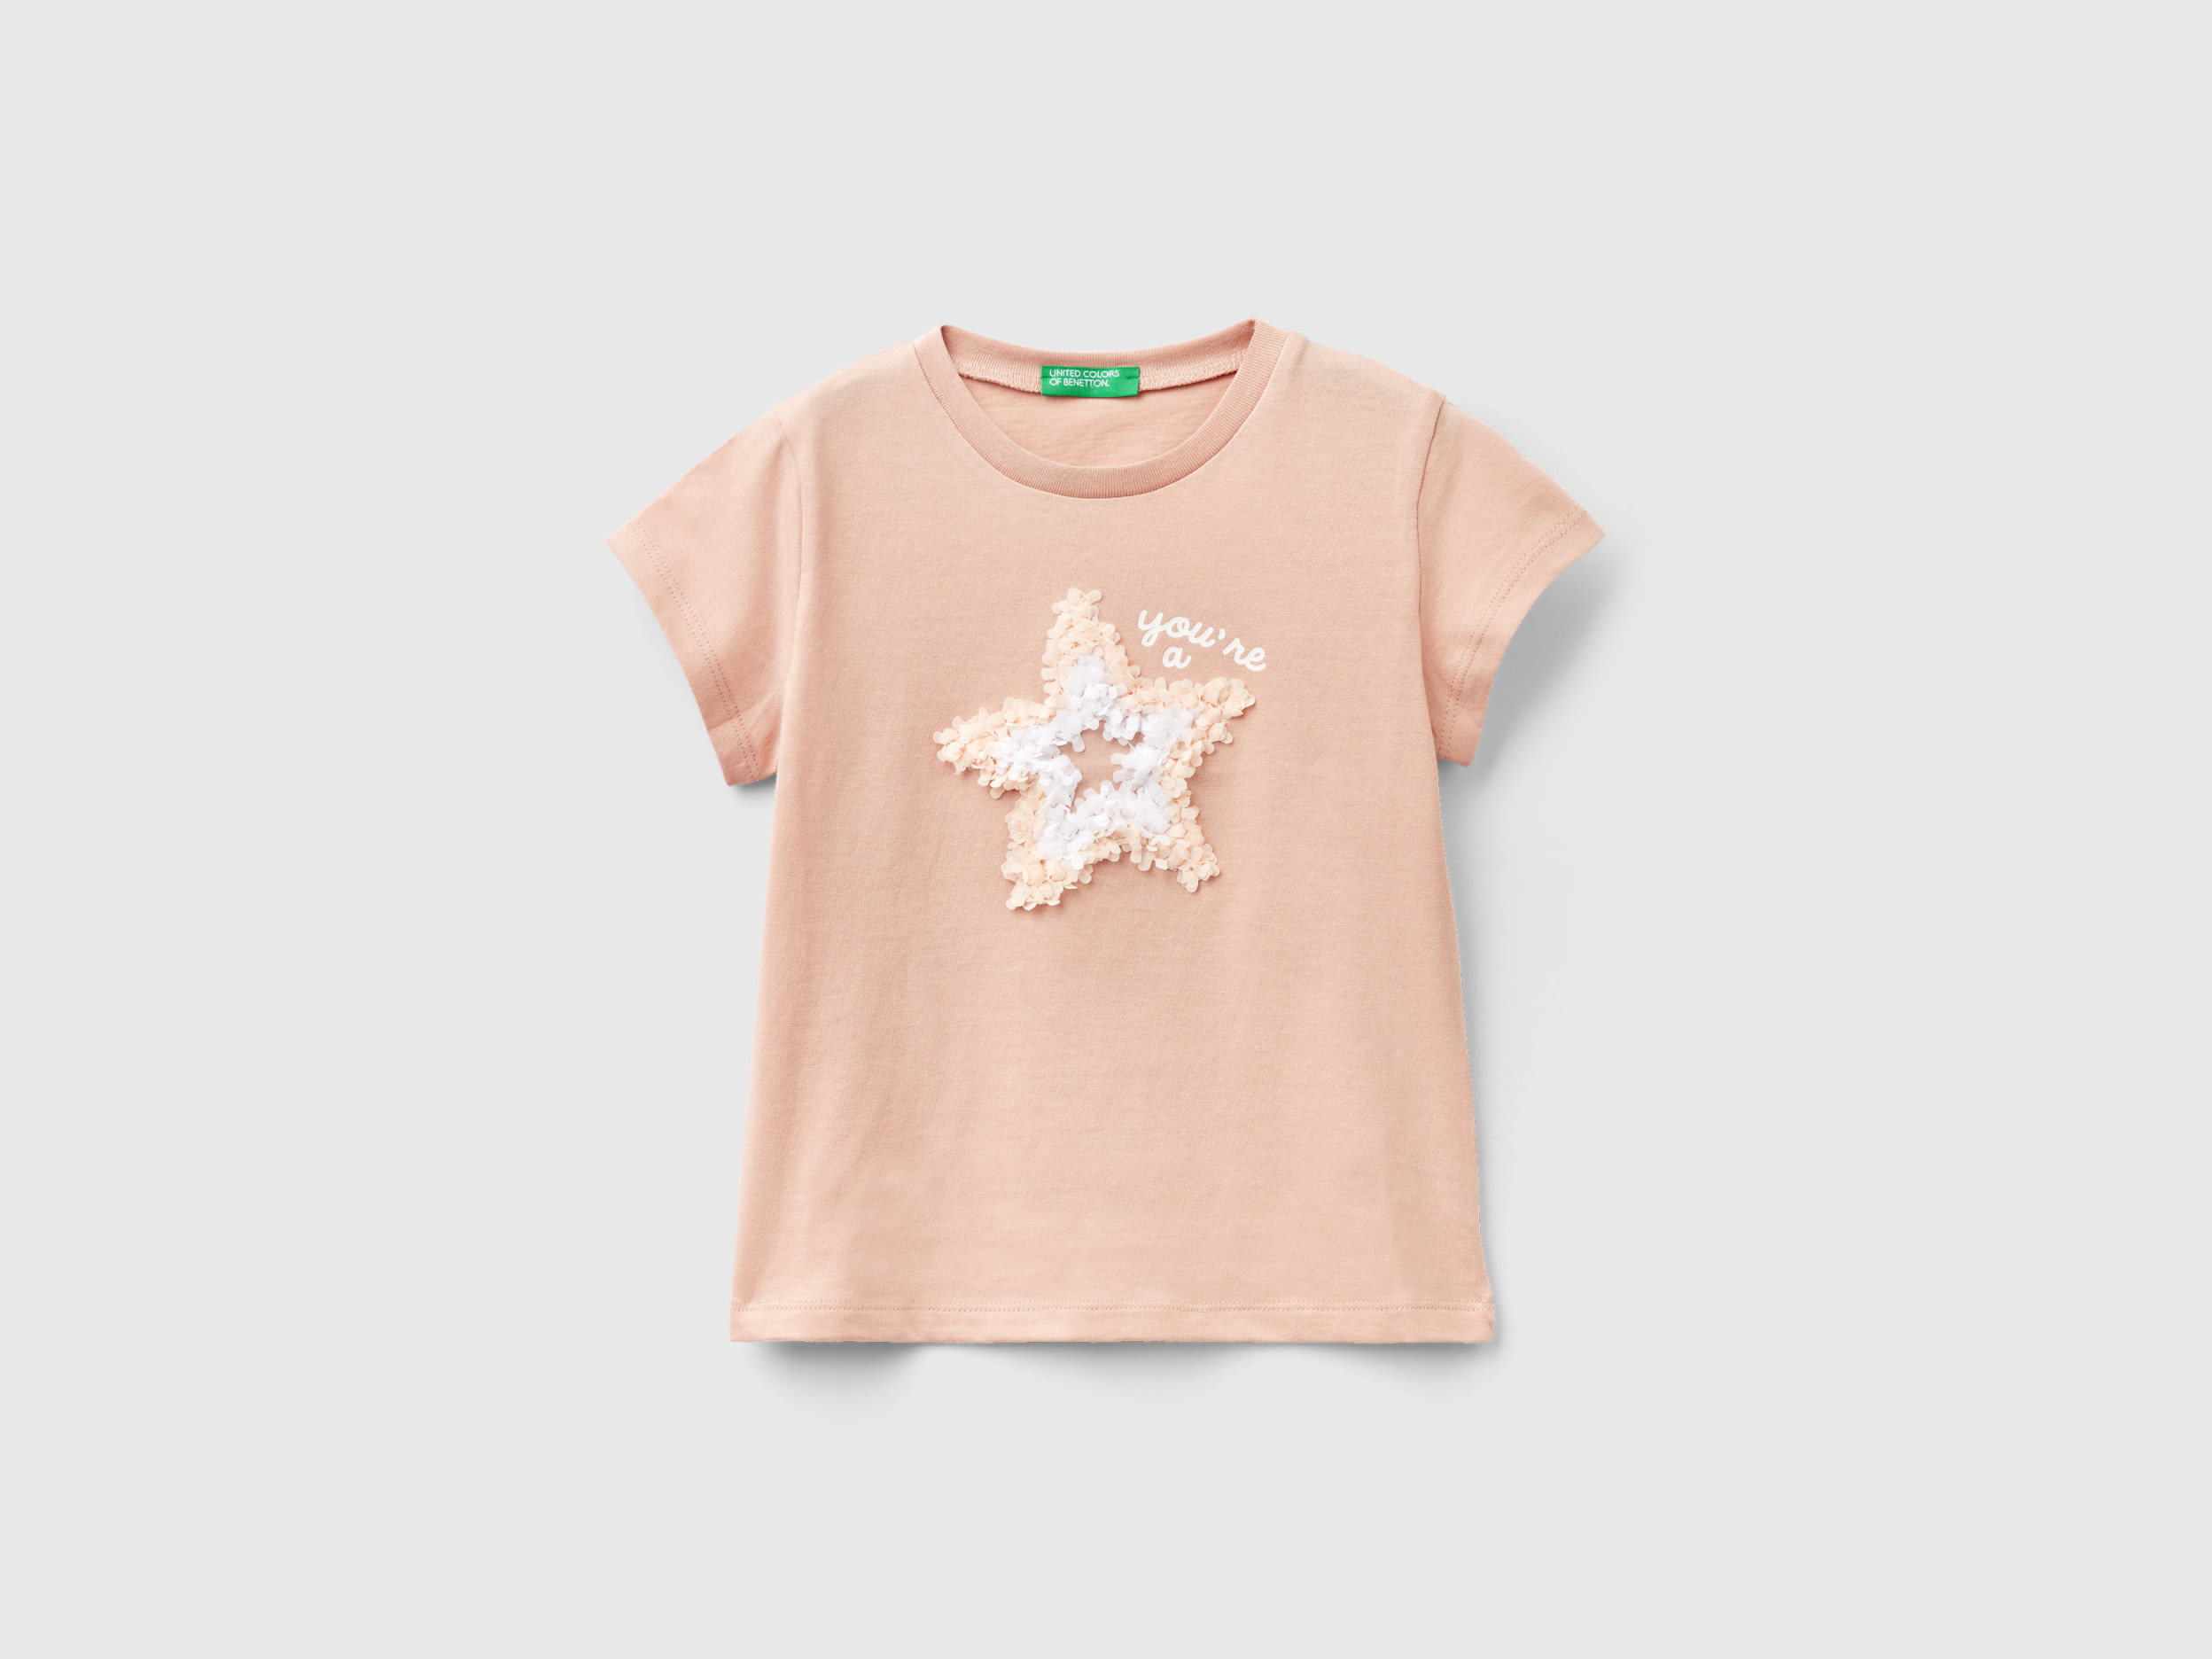 Image of Benetton, T-shirt With Petal Effect Applique, size 116, Soft Pink, Kids